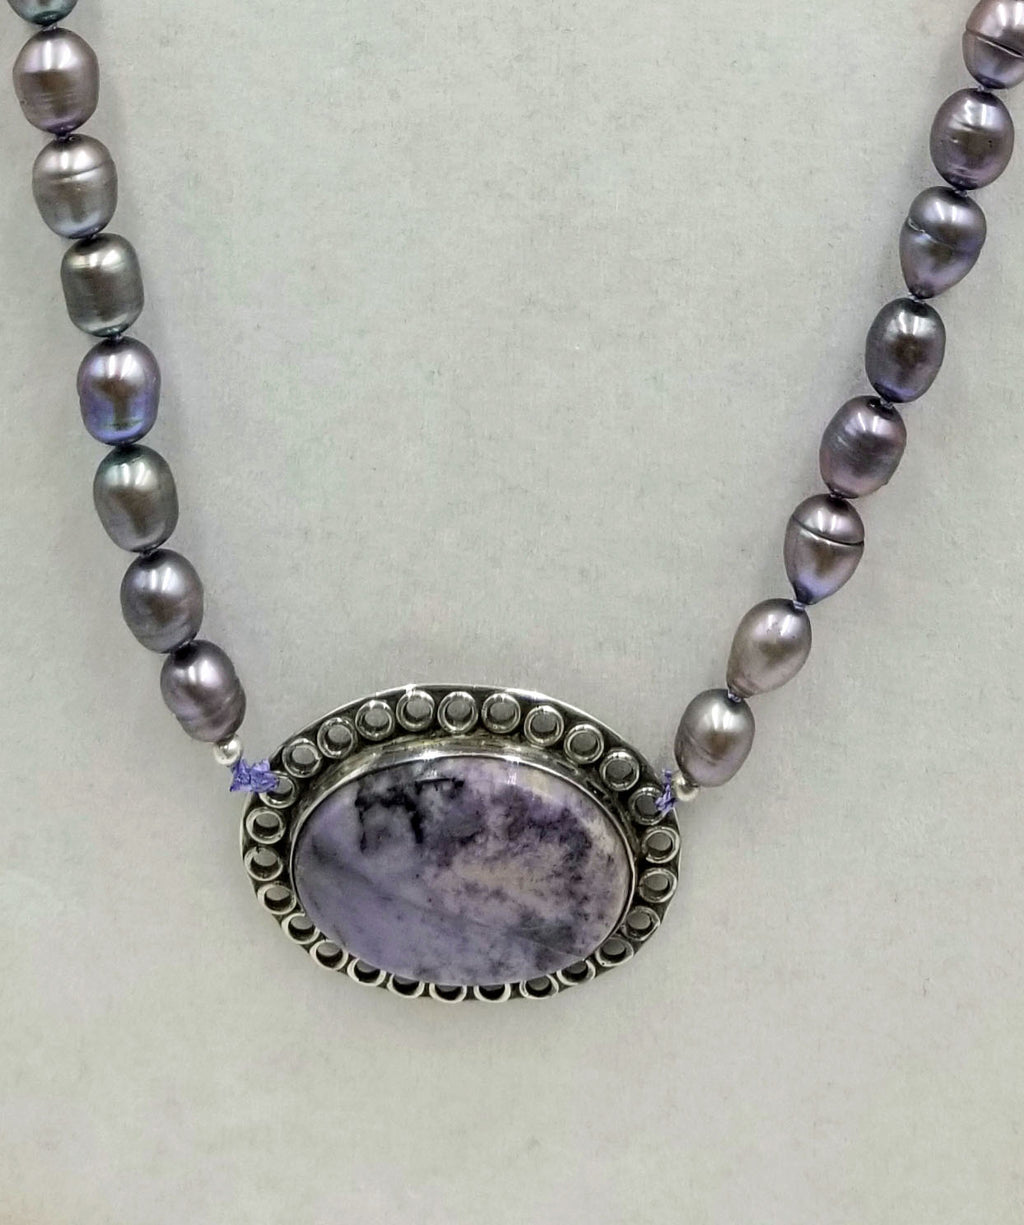 Baroque peacock pearls, sterling silver & sugilite pendant, hand-knotted necklace on lilac silk.  35" Length.